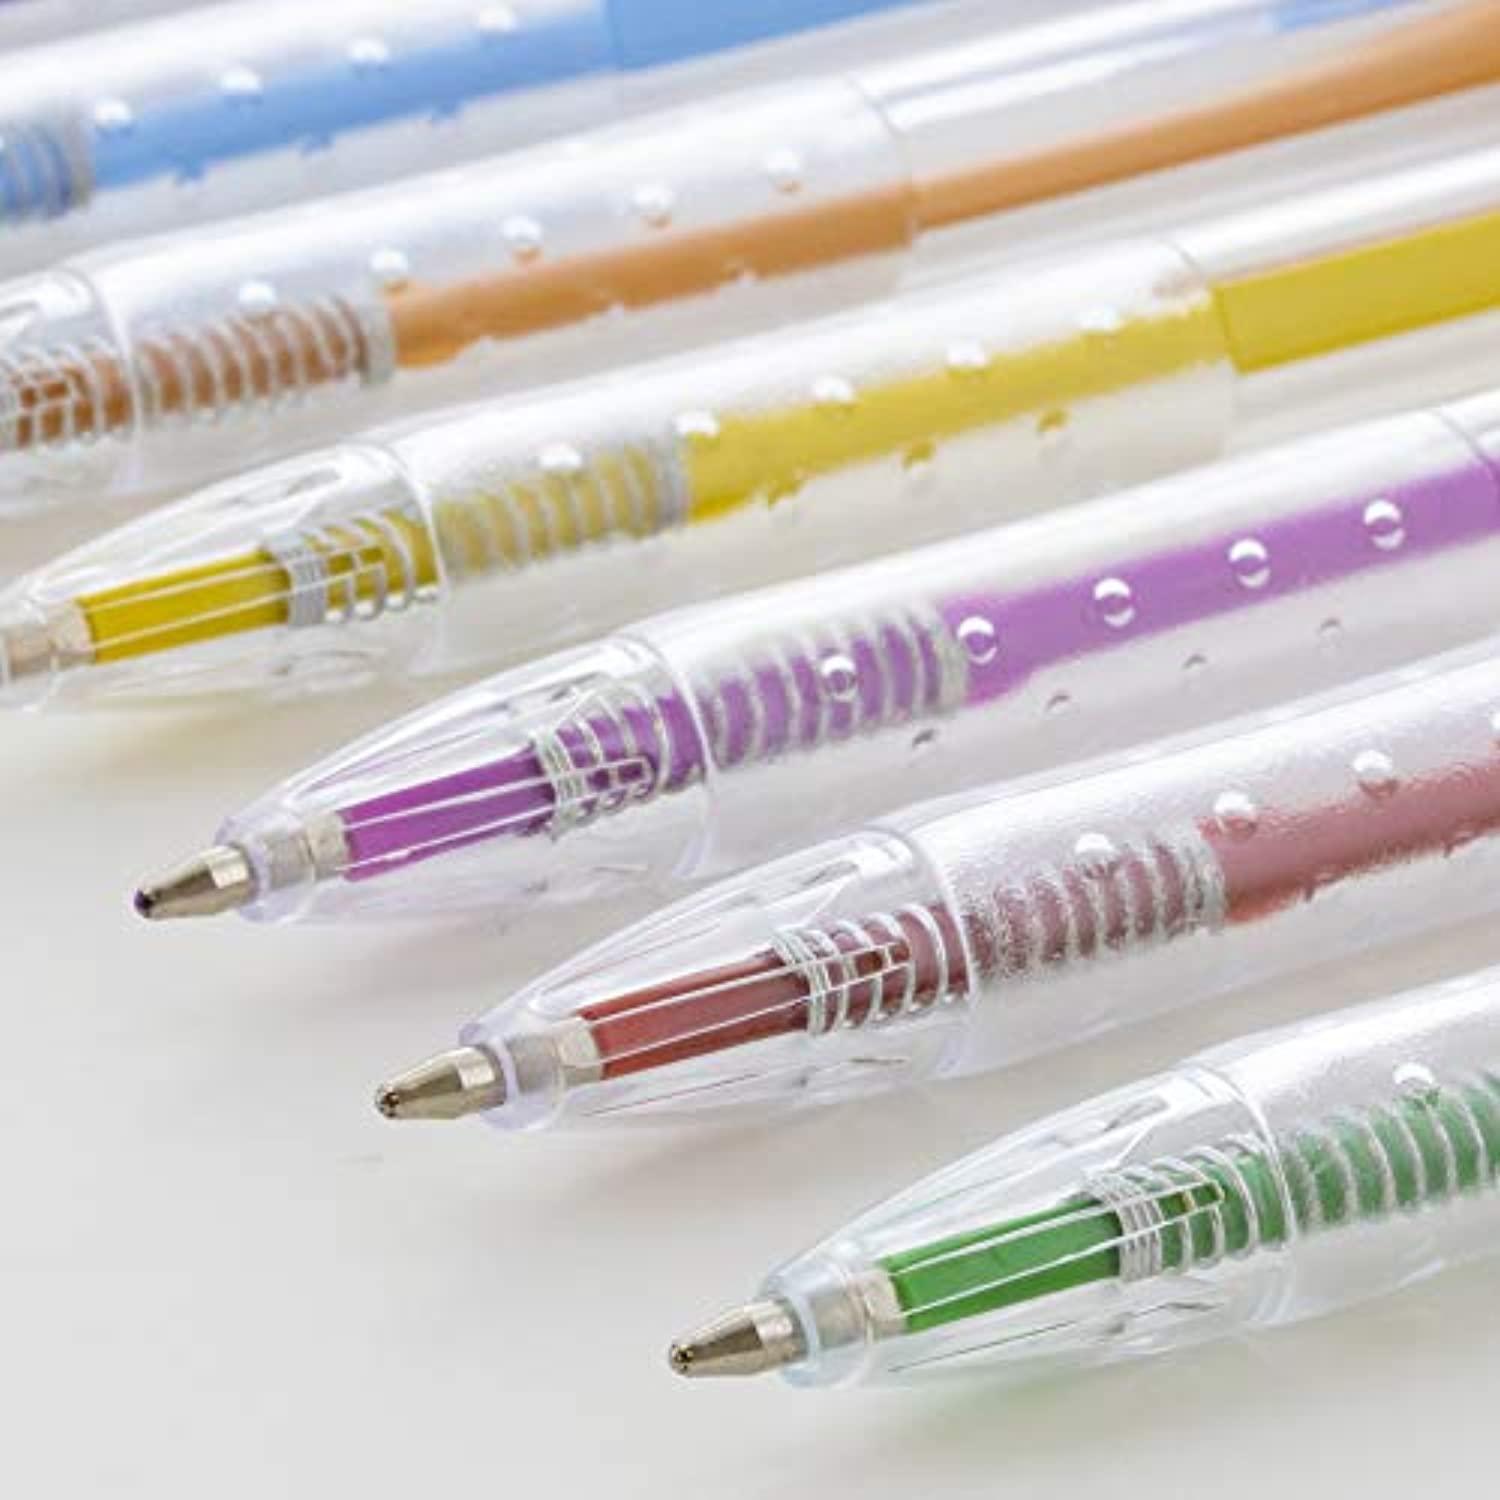 G8Central 10 Color Retractable Pen 1.0 mm Bold Line, Ballpoint Pens, Assorted Colors Smooth Writing Pens, Office Home, 1-Pack.